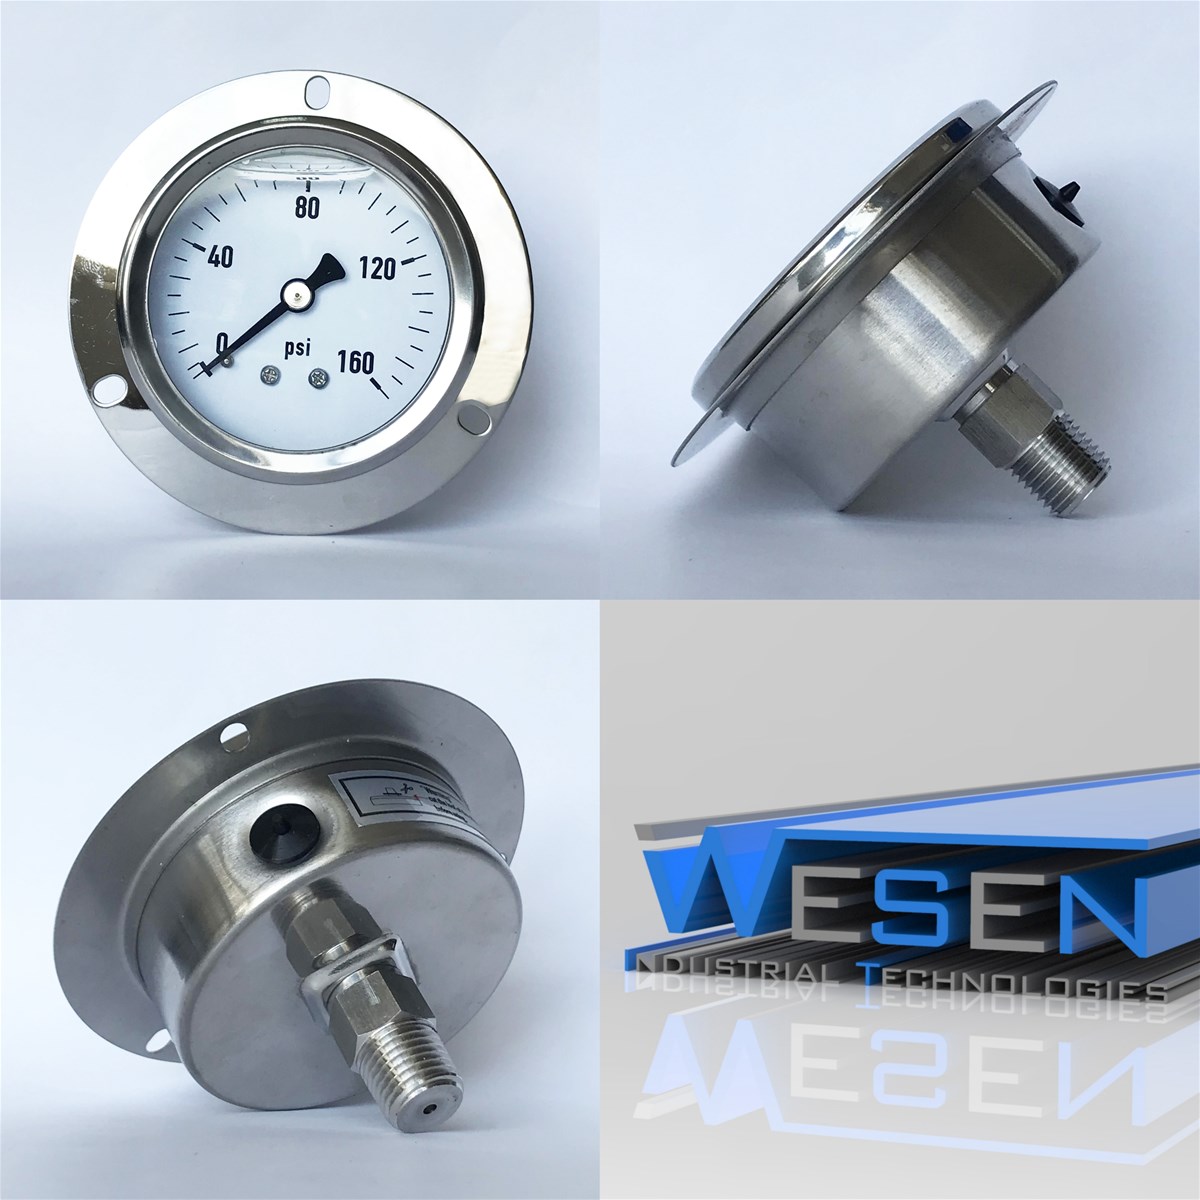 WESEN Technologies Pressure Gauge 63mm 160PSI all stainless steel with front flange 3 hole